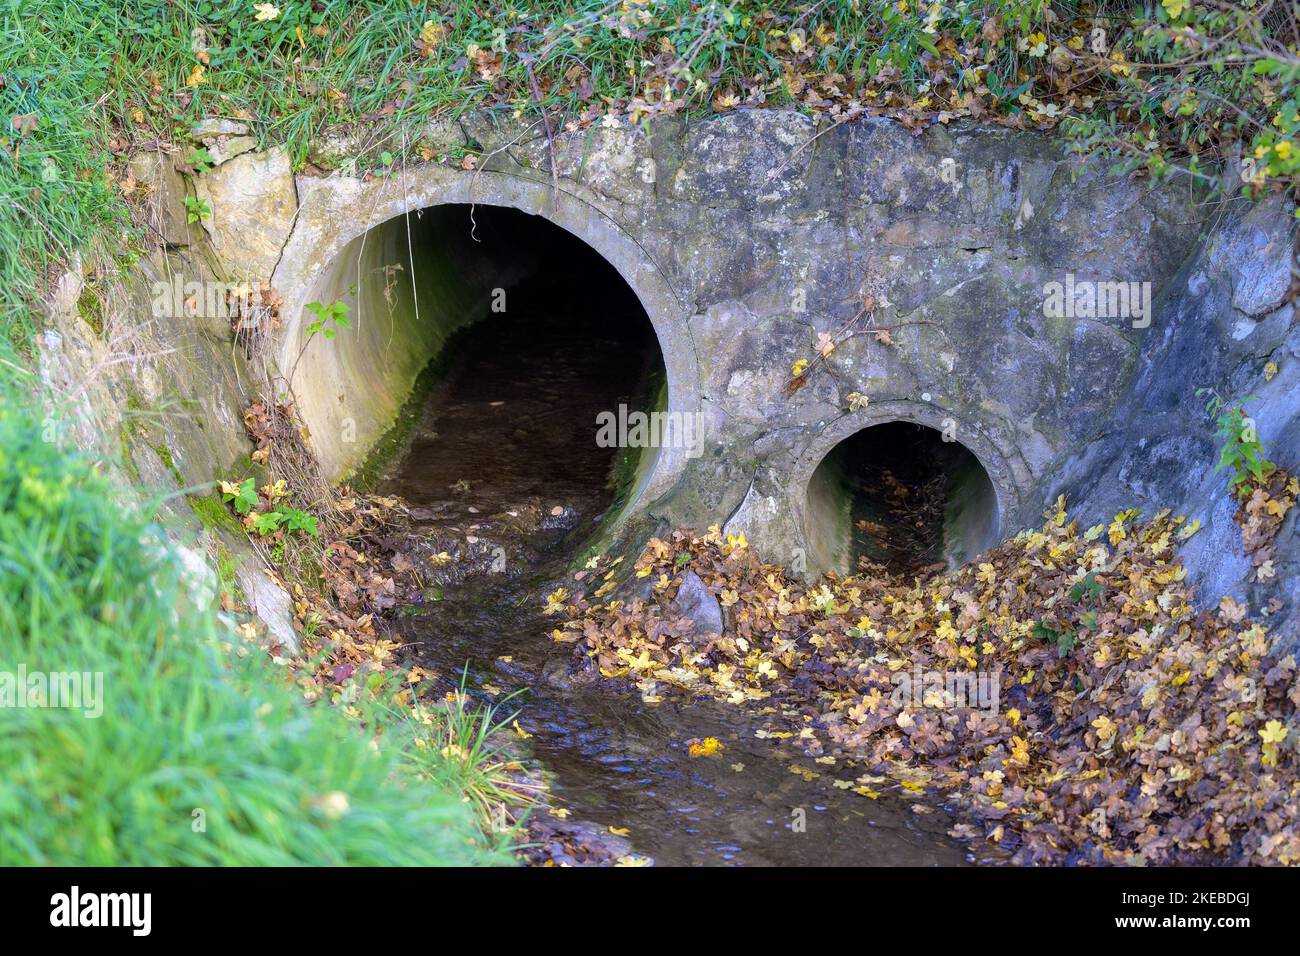 View of sewerage drain pipes in nature Stock Photo